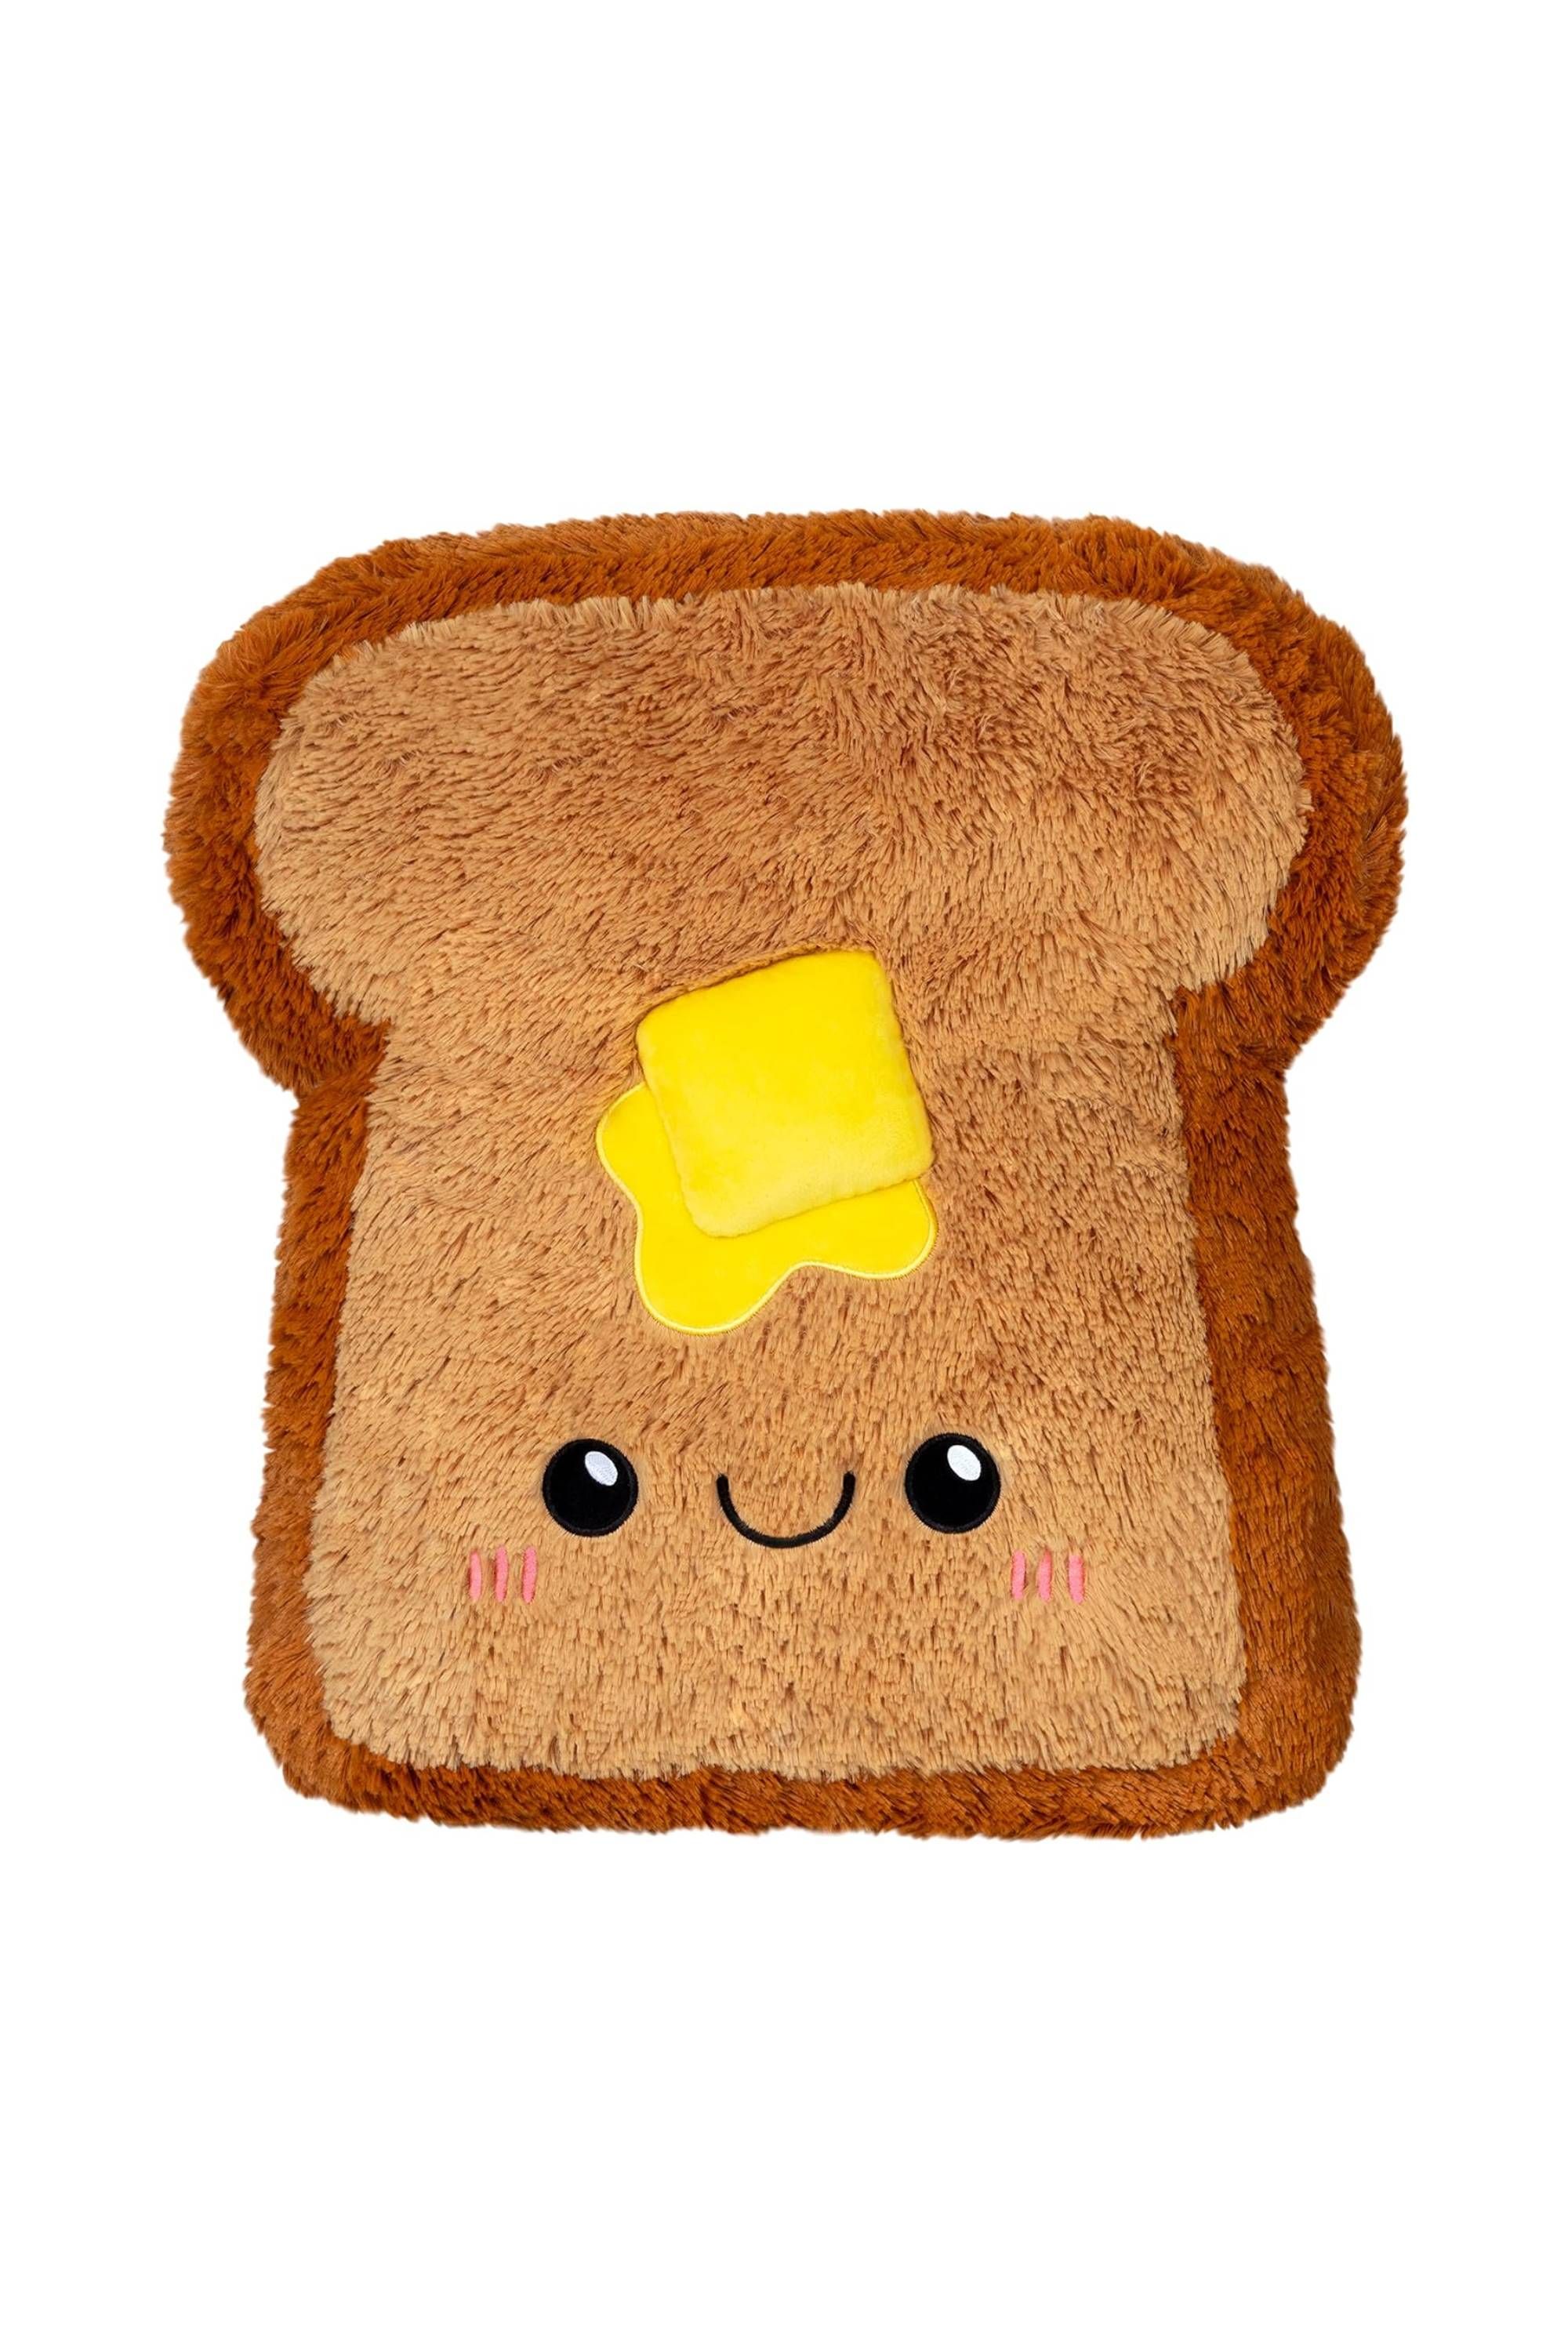 Comfort Food Buttered Toast Squishable